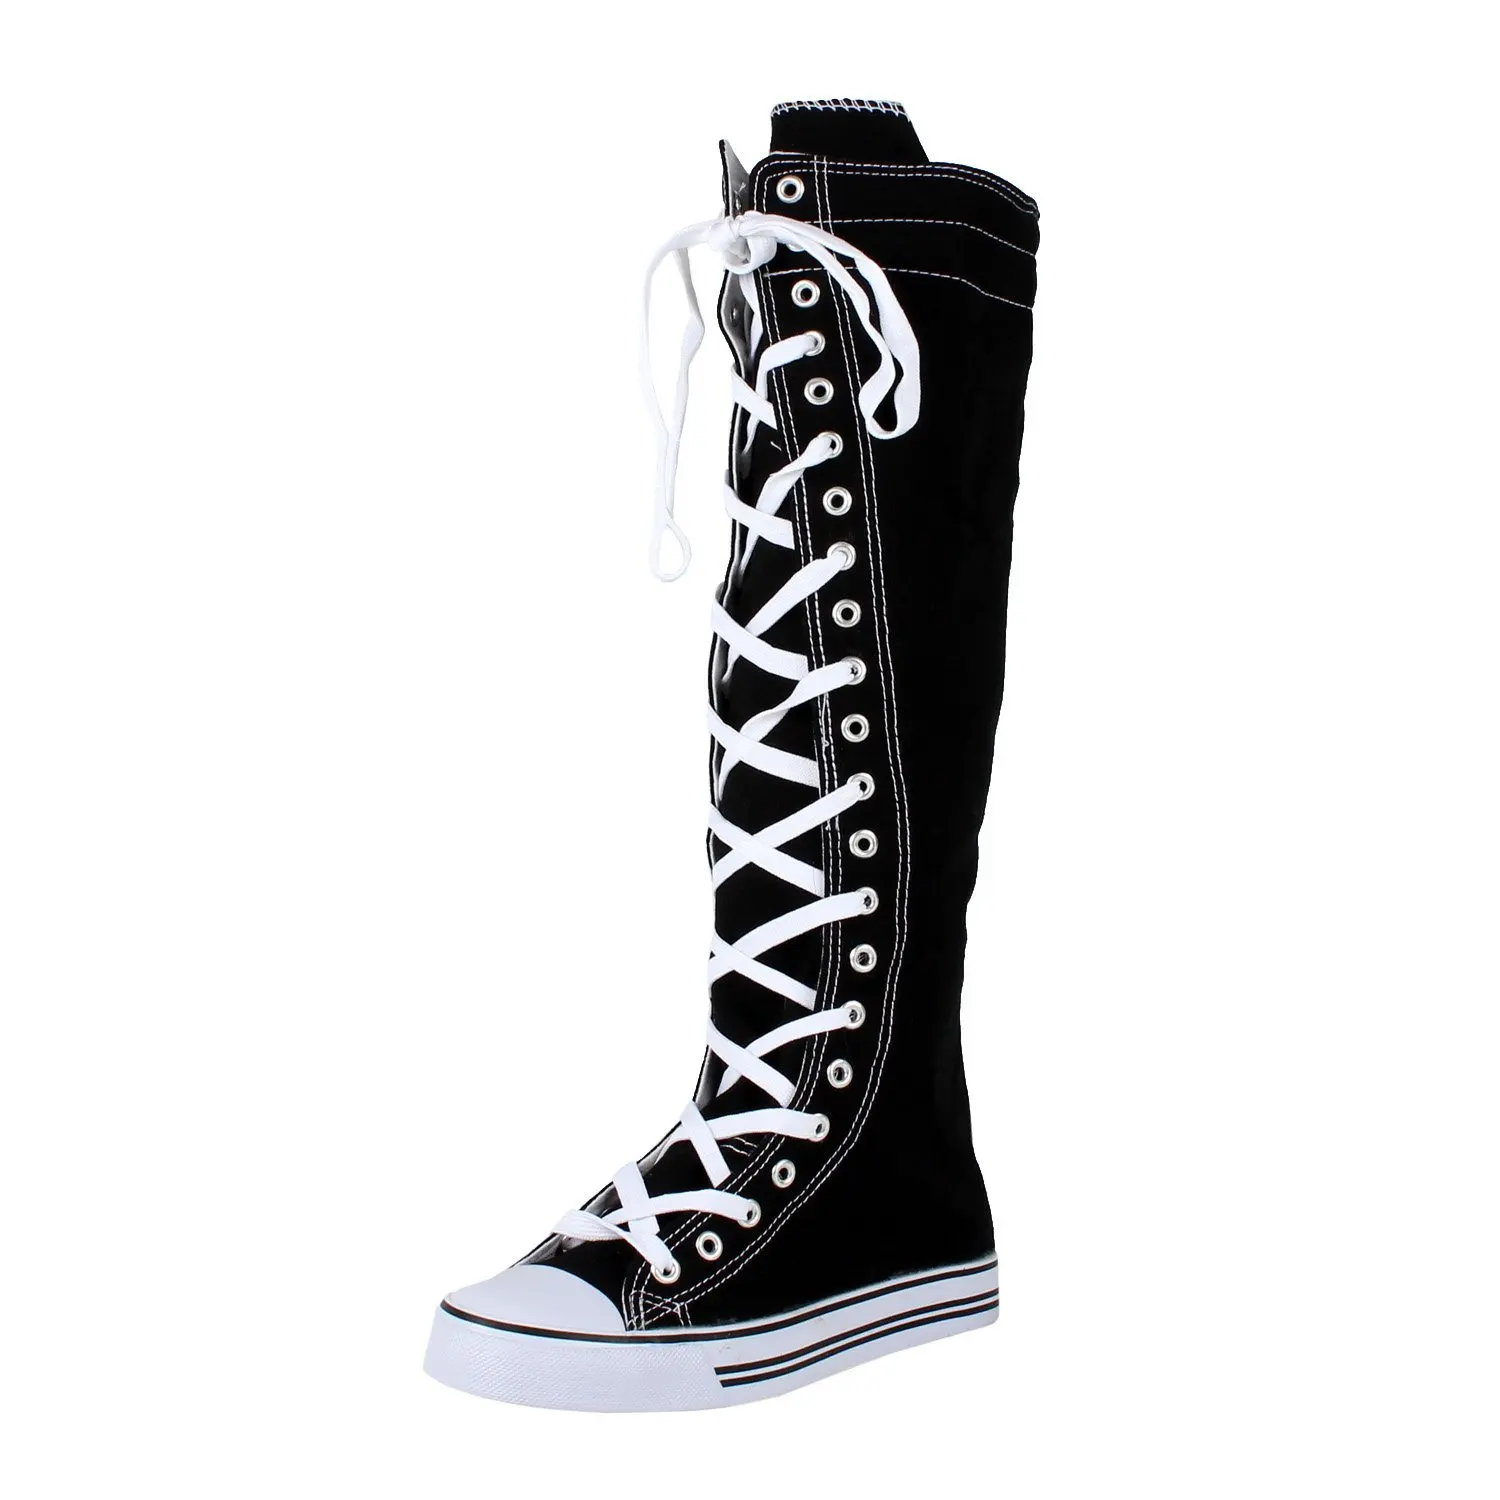 Cheap Lace Up Knee High Sneakers, find Lace Up Knee High Sneakers deals ...